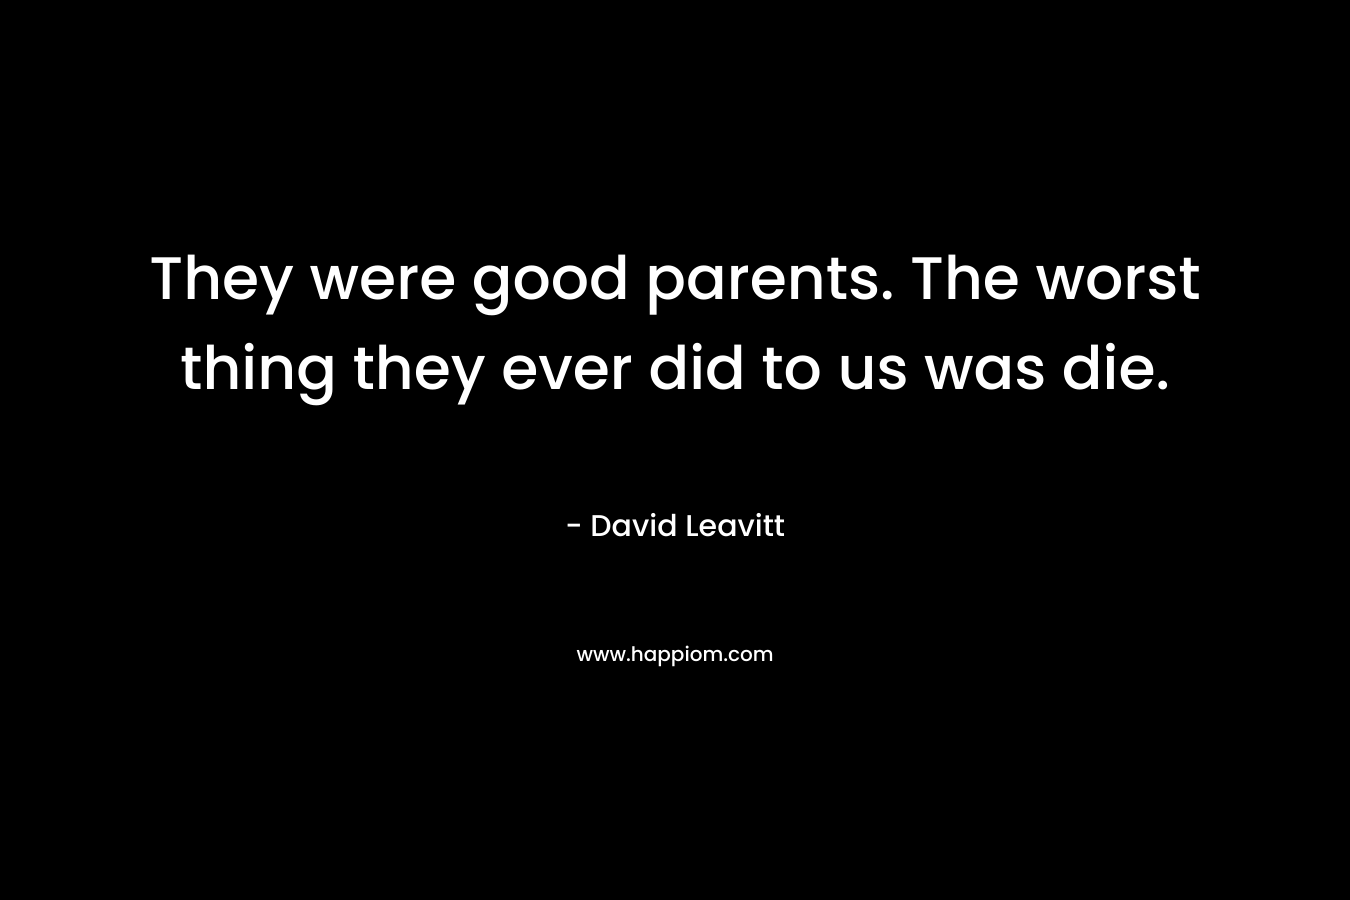 They were good parents. The worst thing they ever did to us was die. – David Leavitt